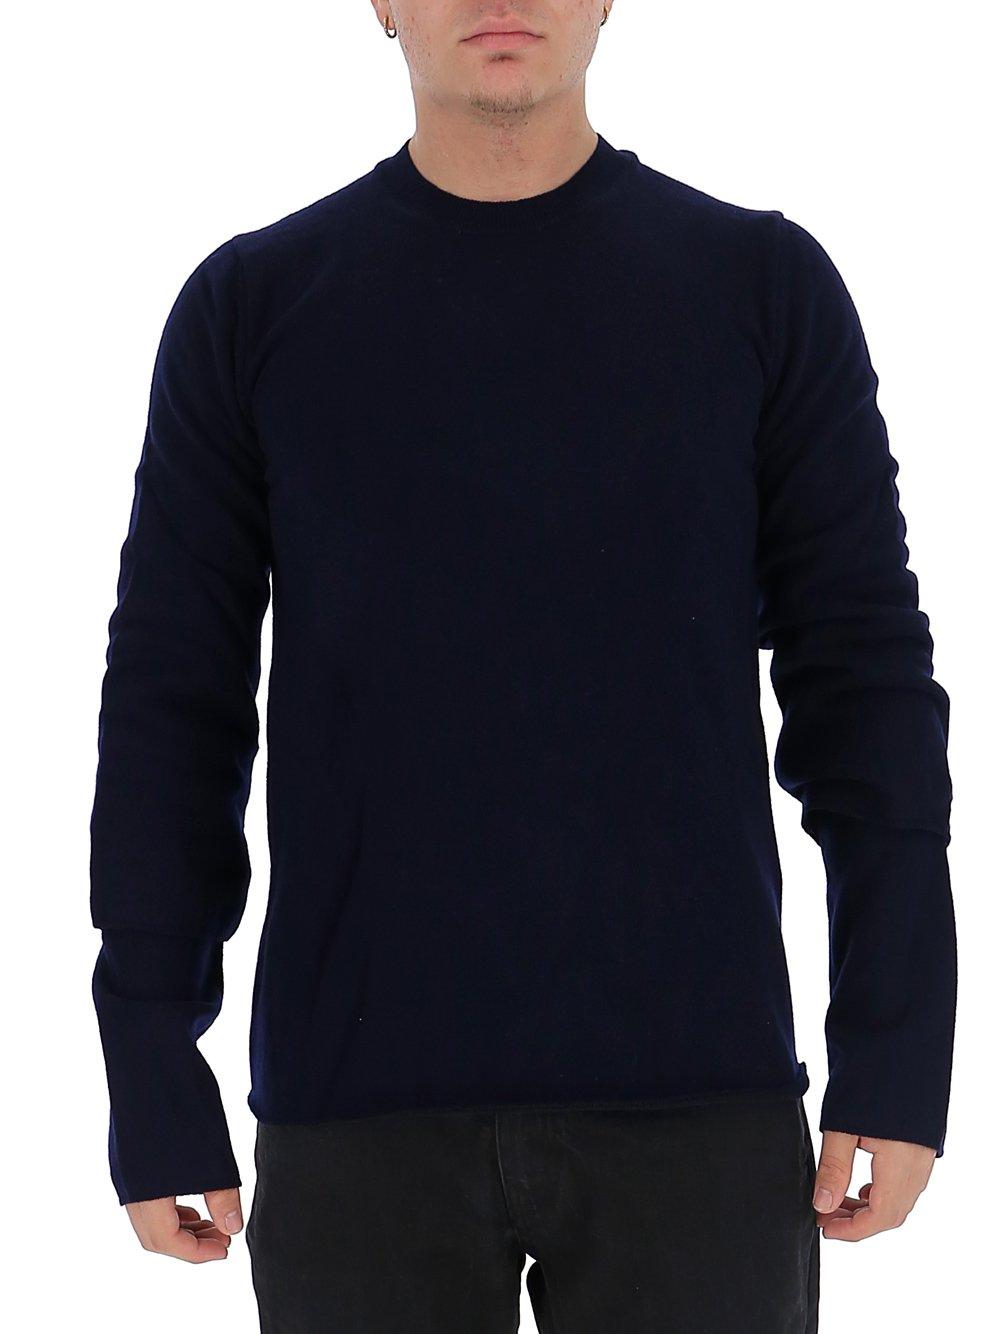 Comme des Garçons Wool Layered Knitted Sweater in Blue for Men - Lyst